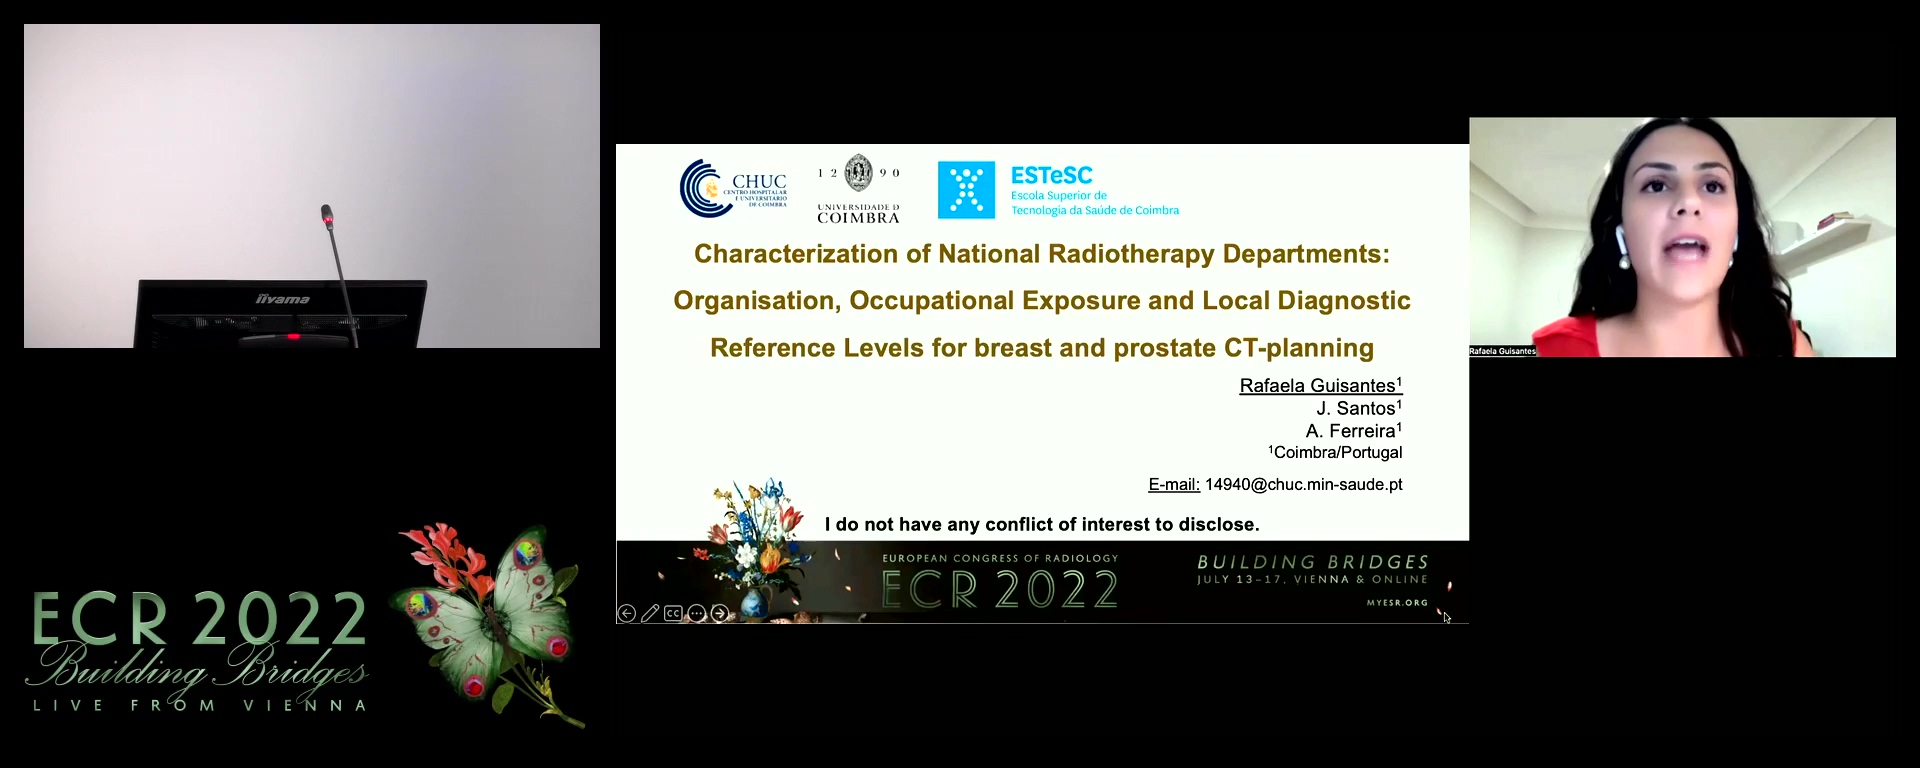 Characterisation of national radiotherapy departments: organisation, occupational exposure values and local diagnostic reference levels for breast and prostate CT-planning - Rafaela Guisantes, Coimbra / PT